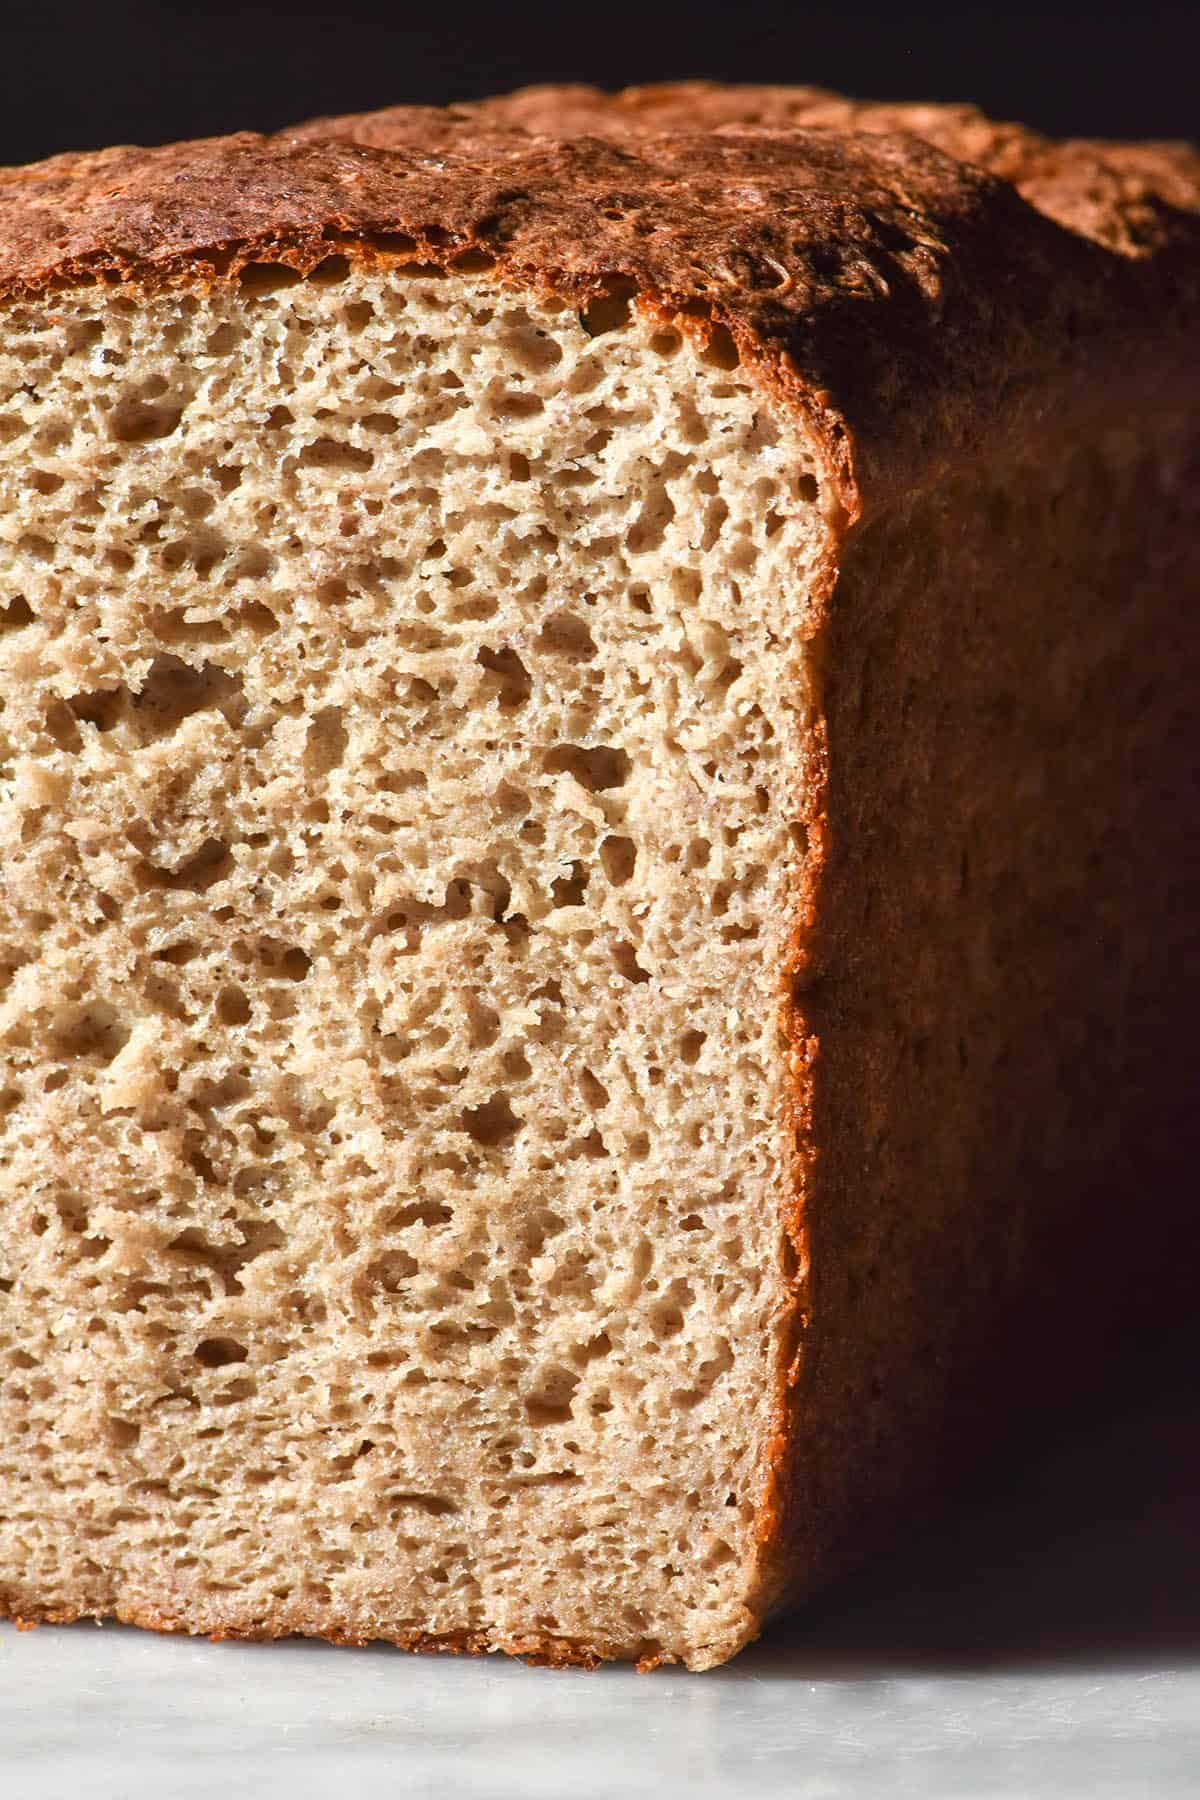 A side on image of a loaf of high protein buckwheat bread on a white marble table in contrasting sunlight. The loaf has been sliced to reveal the inner crumb.